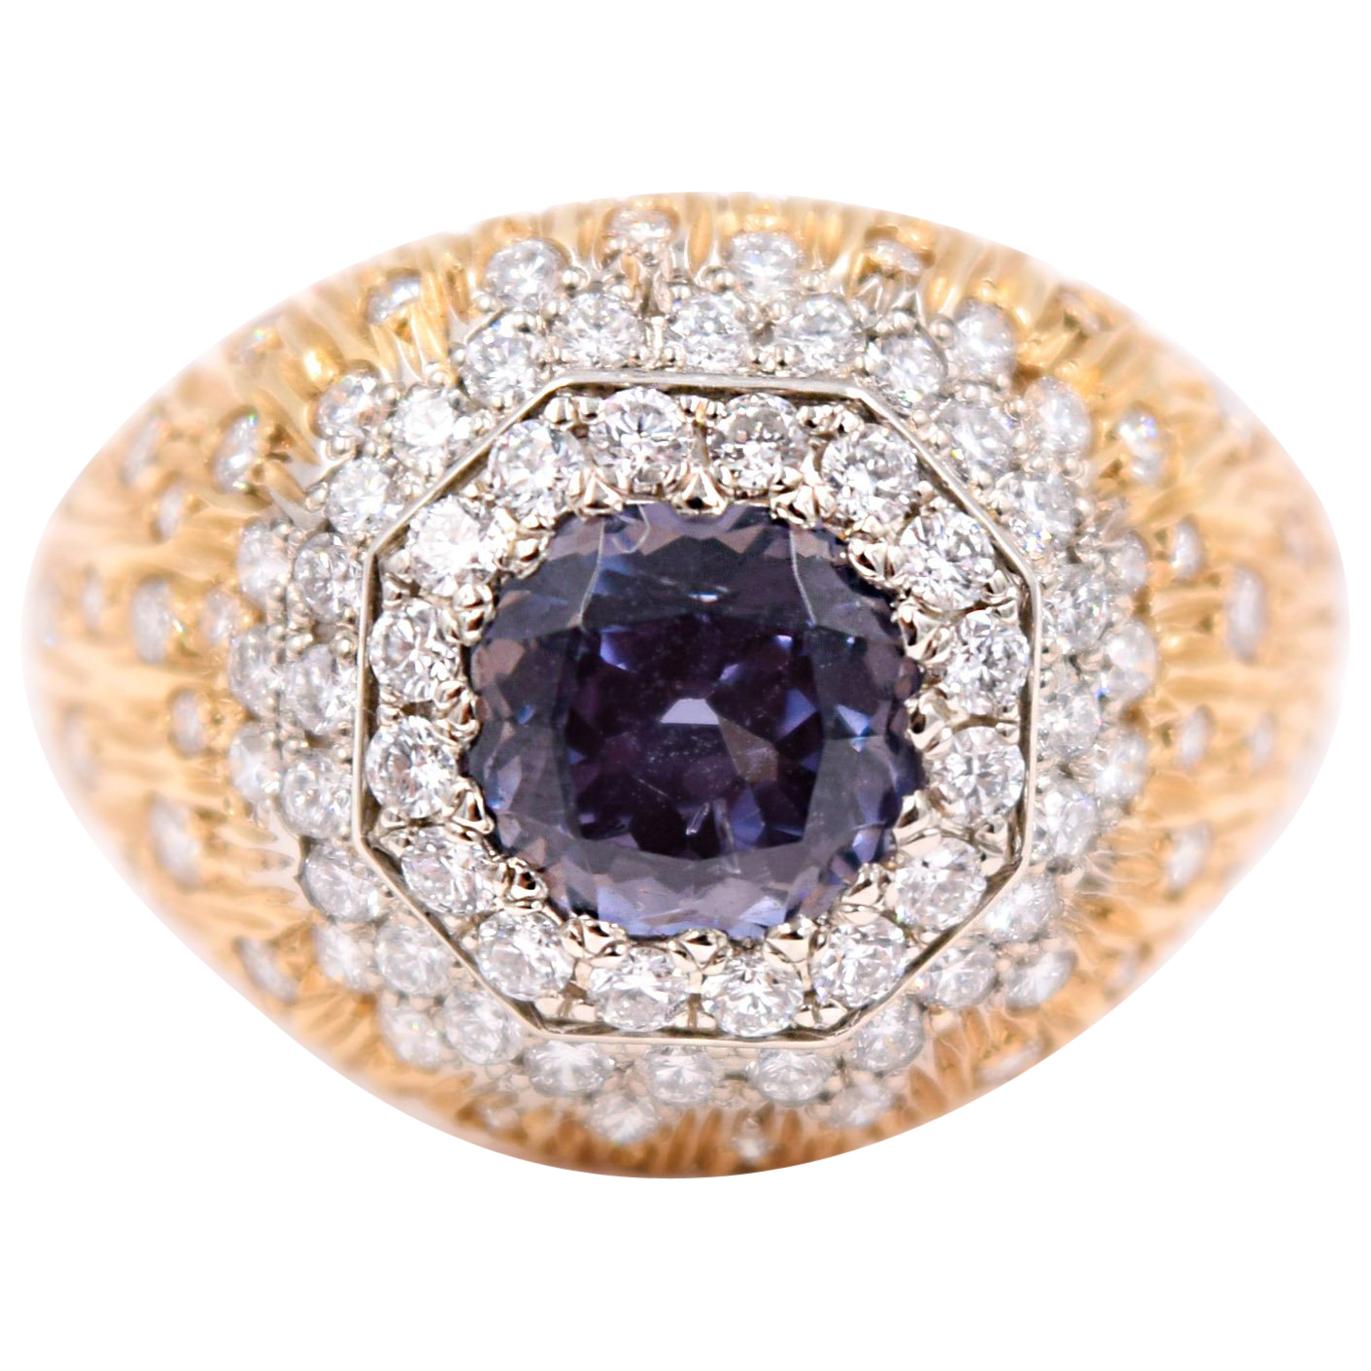 Carl Priolo 1.75 Carat Blue Spinel and White Diamond Cocktail Ring 18 Karat Gold For Sale